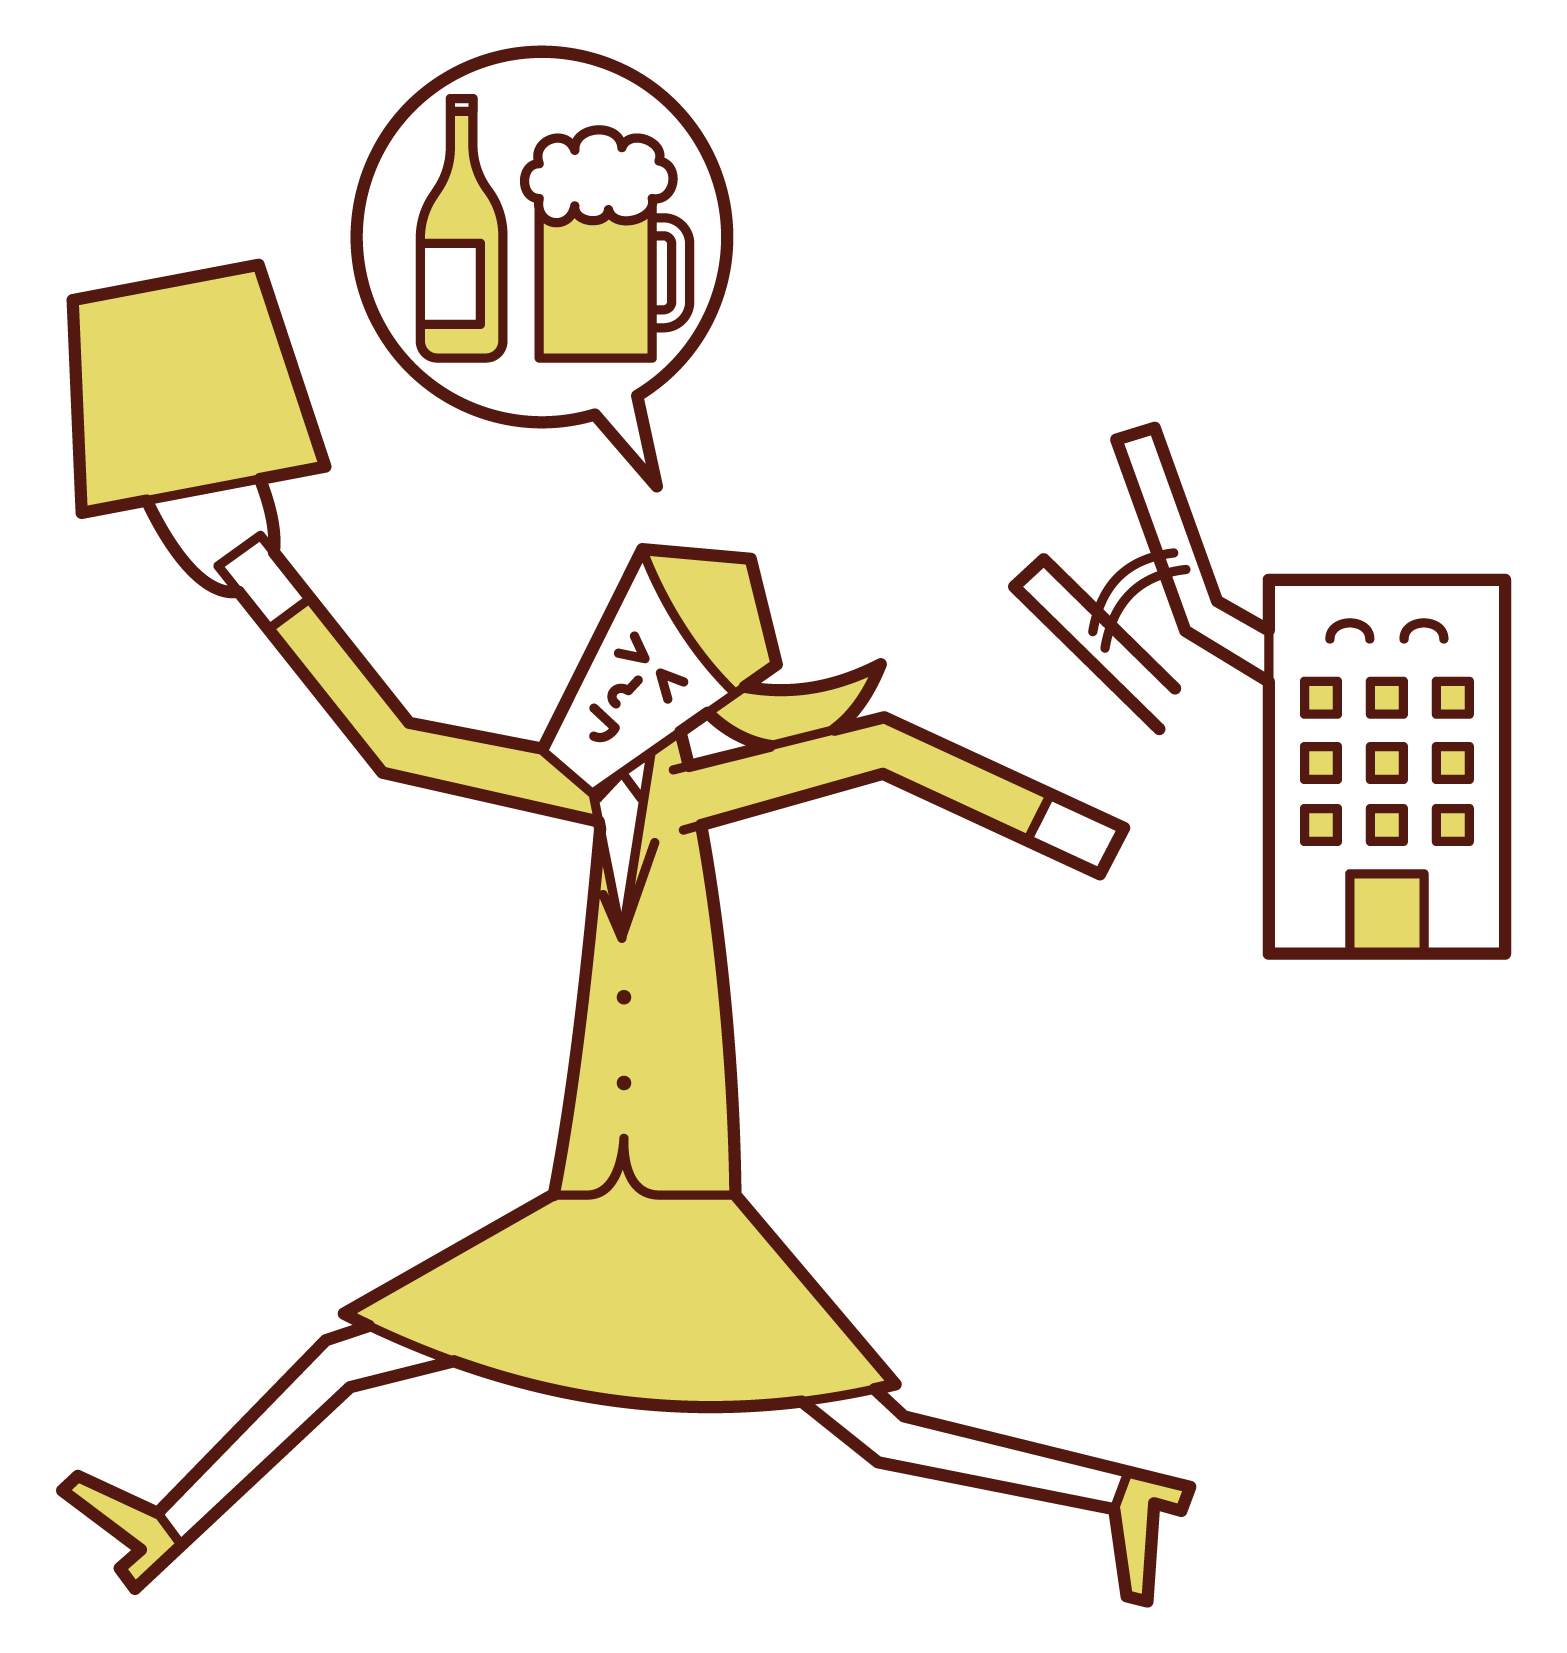 Illustration of a person (woman) leaving the office